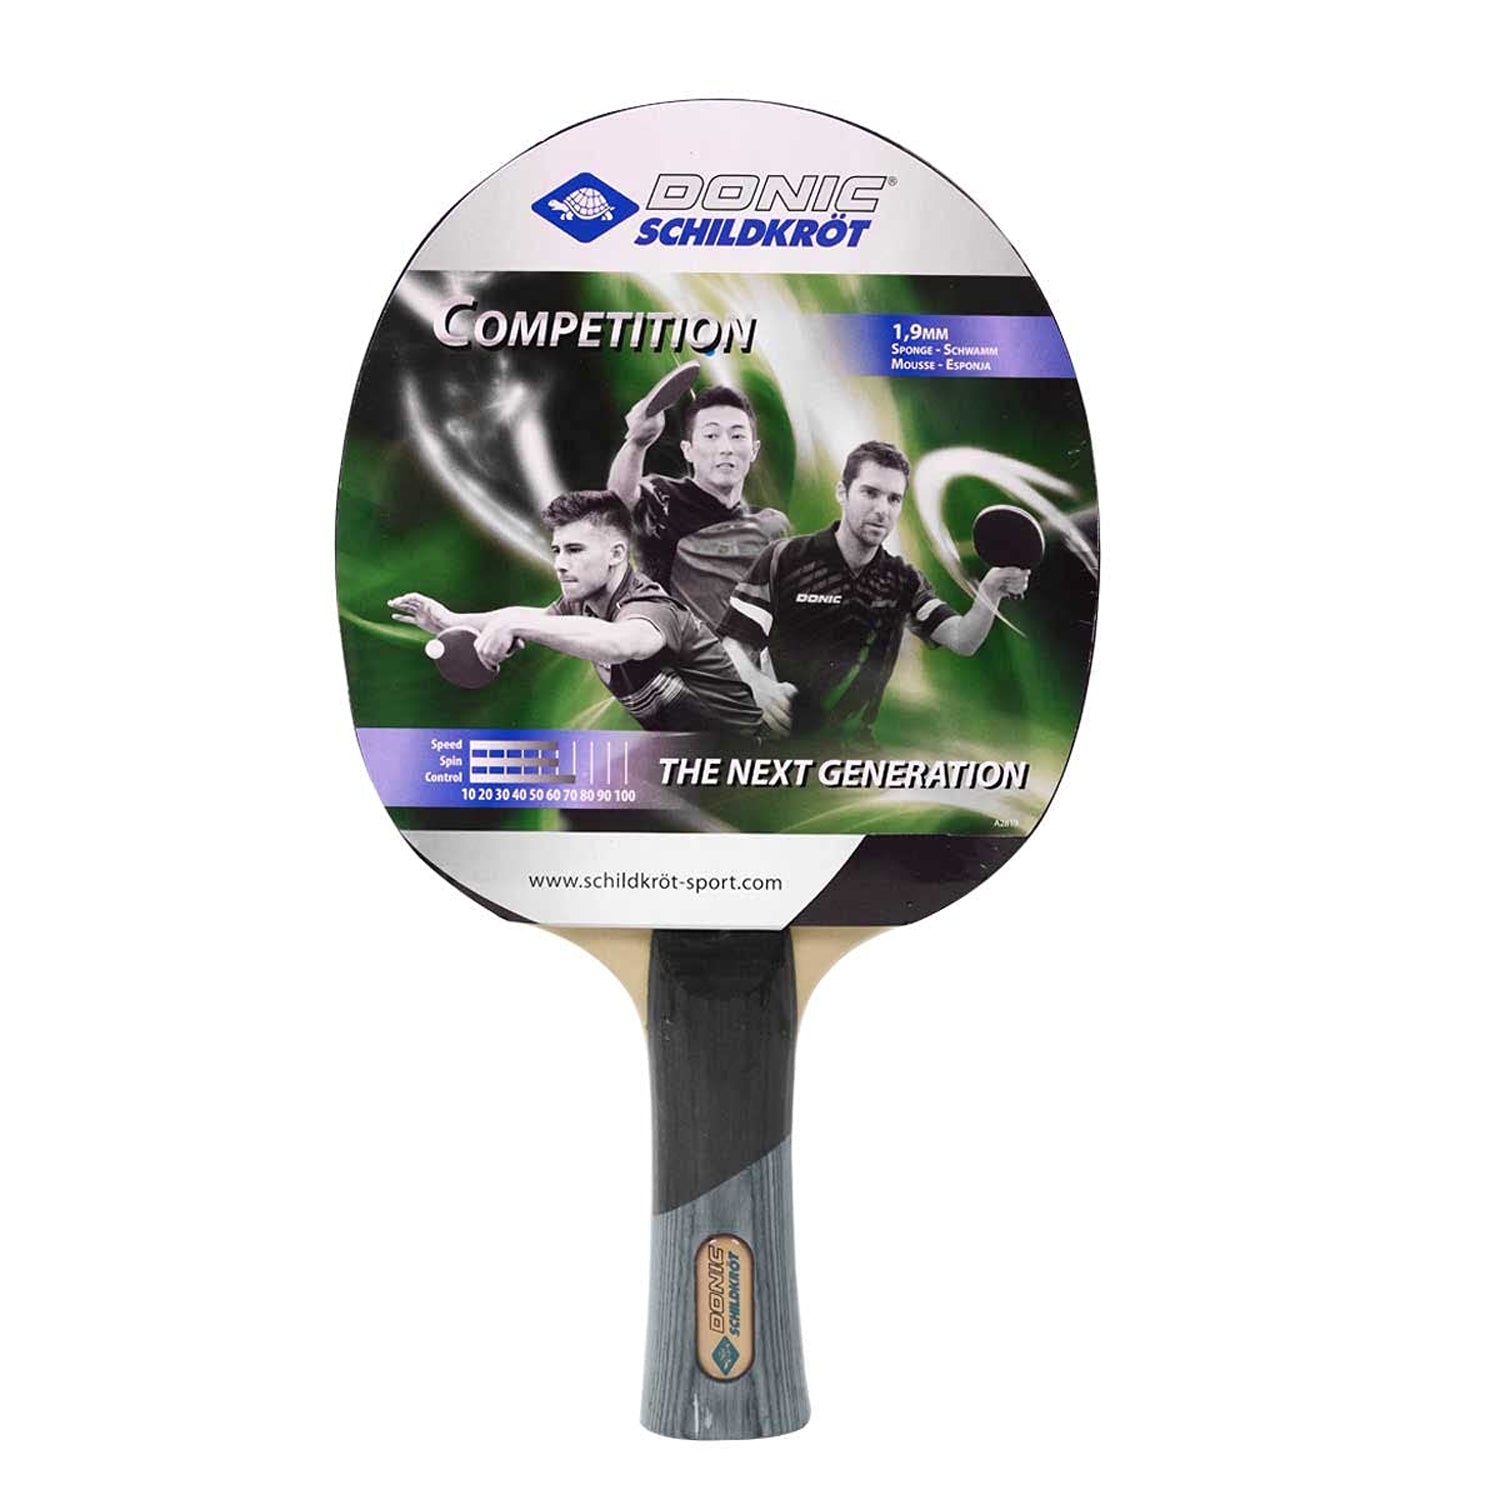 Donic Competition Table Tennis Bat with Cover - Best Price online Prokicksports.com